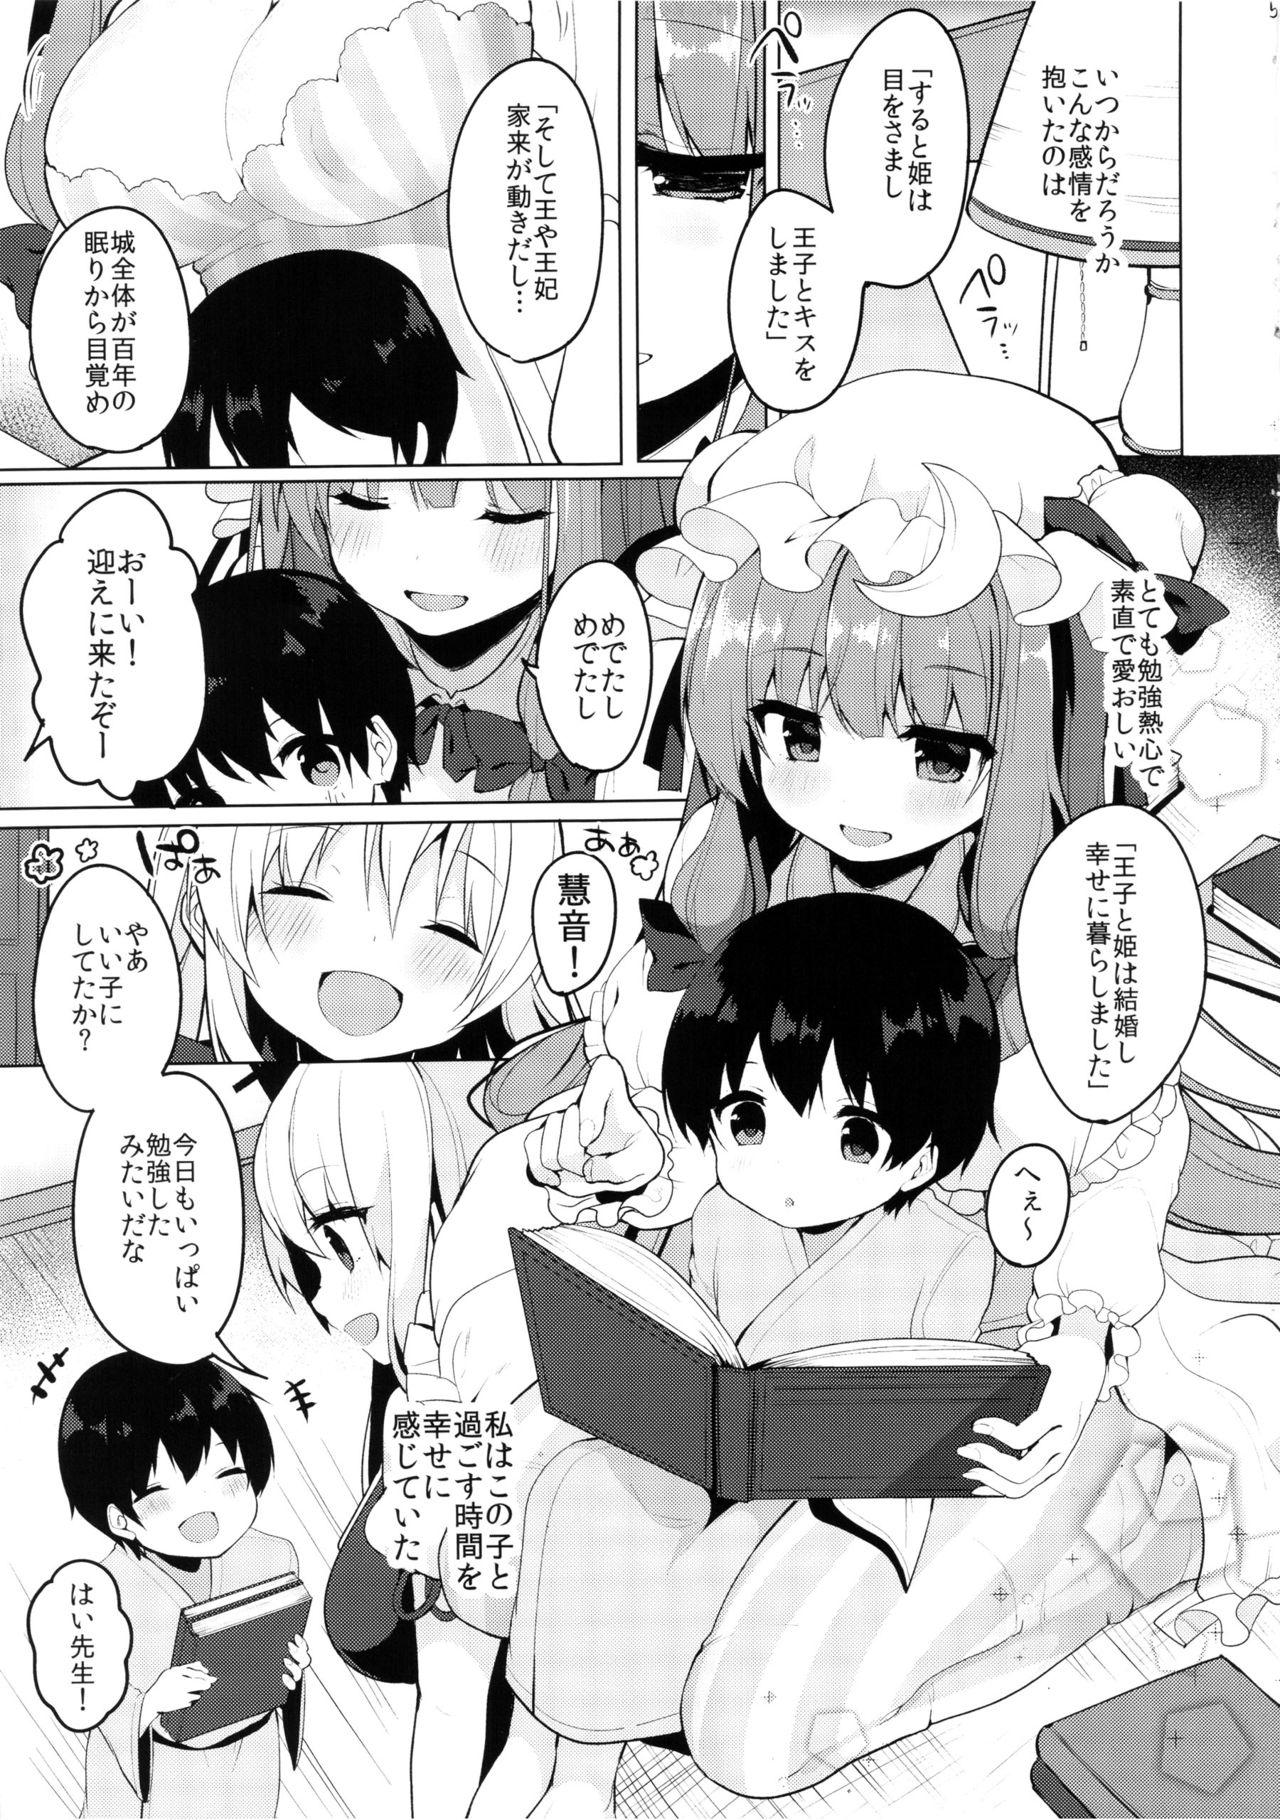 Throat Uso to Koi to Seppun - Touhou project Lesbians - Page 5